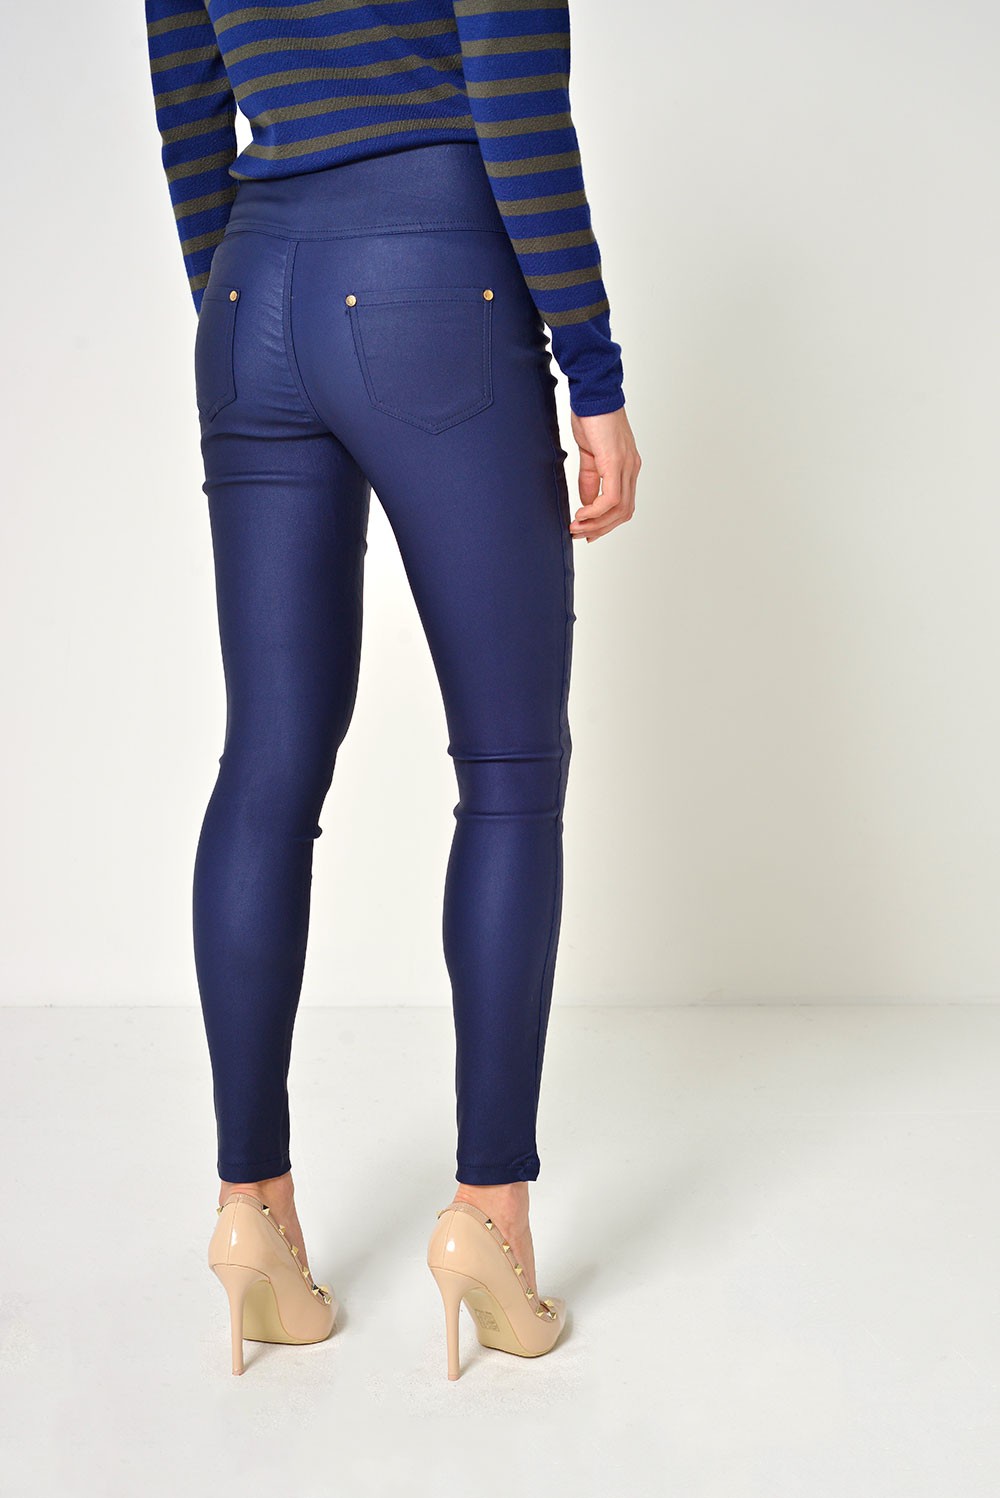 navy coated jeans